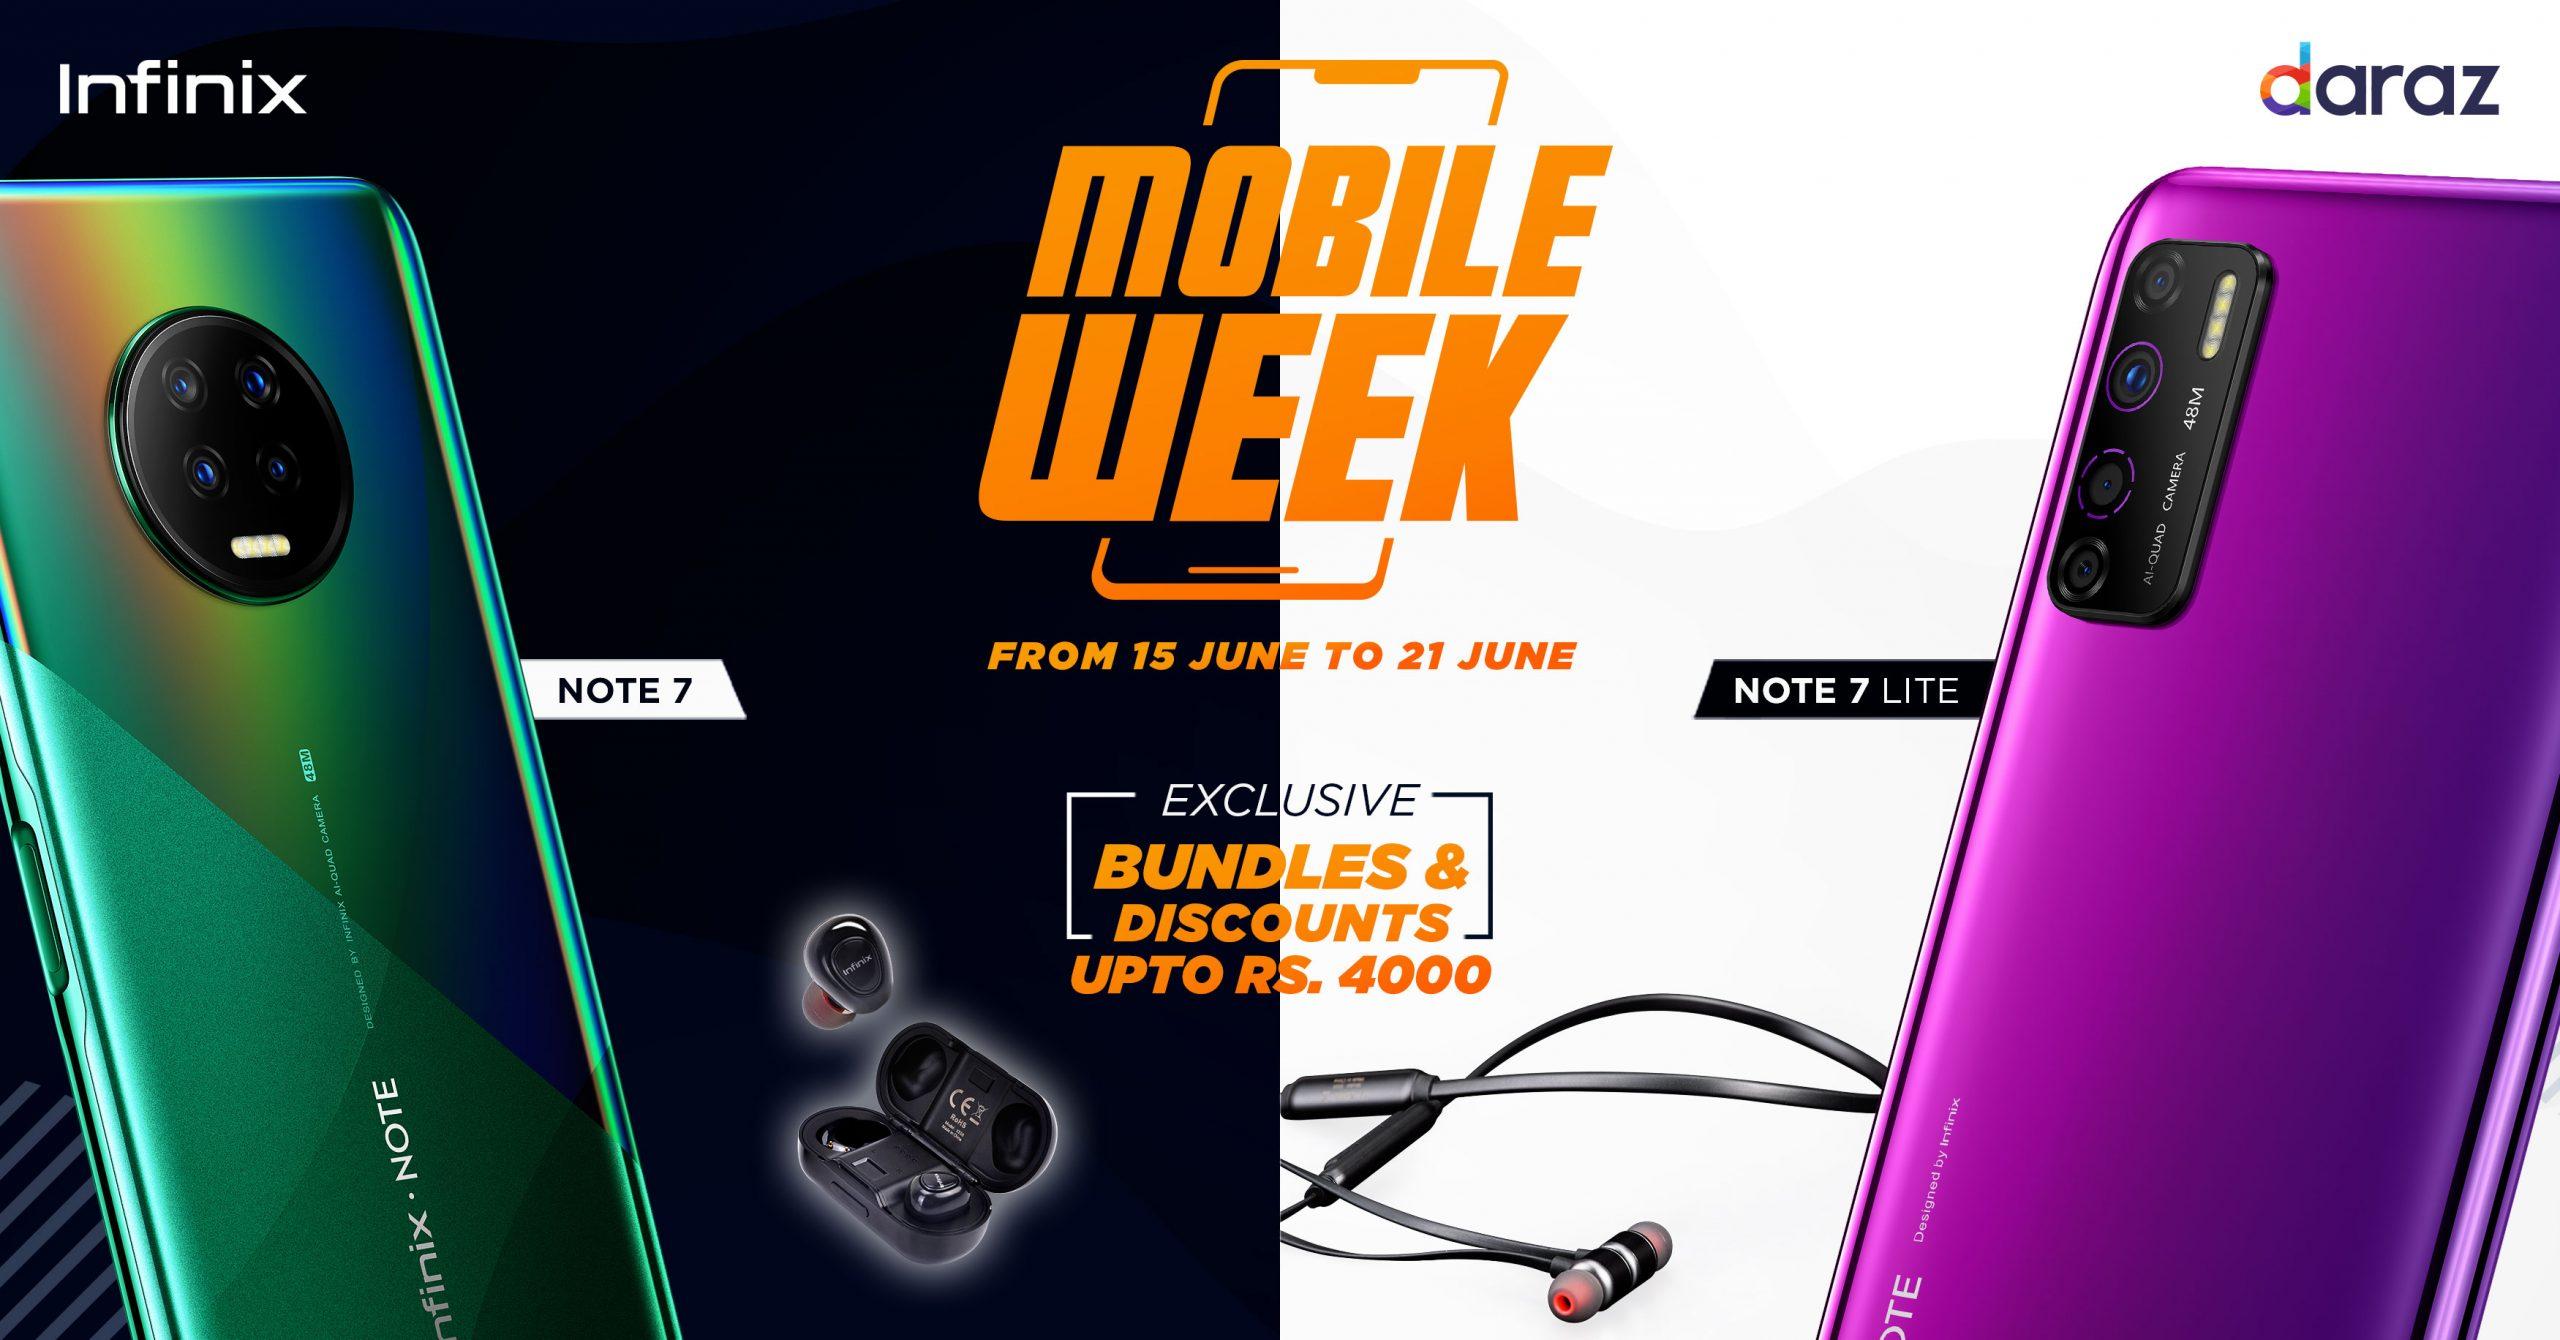 Infinix Partners up with Daraz to bring Exclusive Discount for Daraz Mobile Week